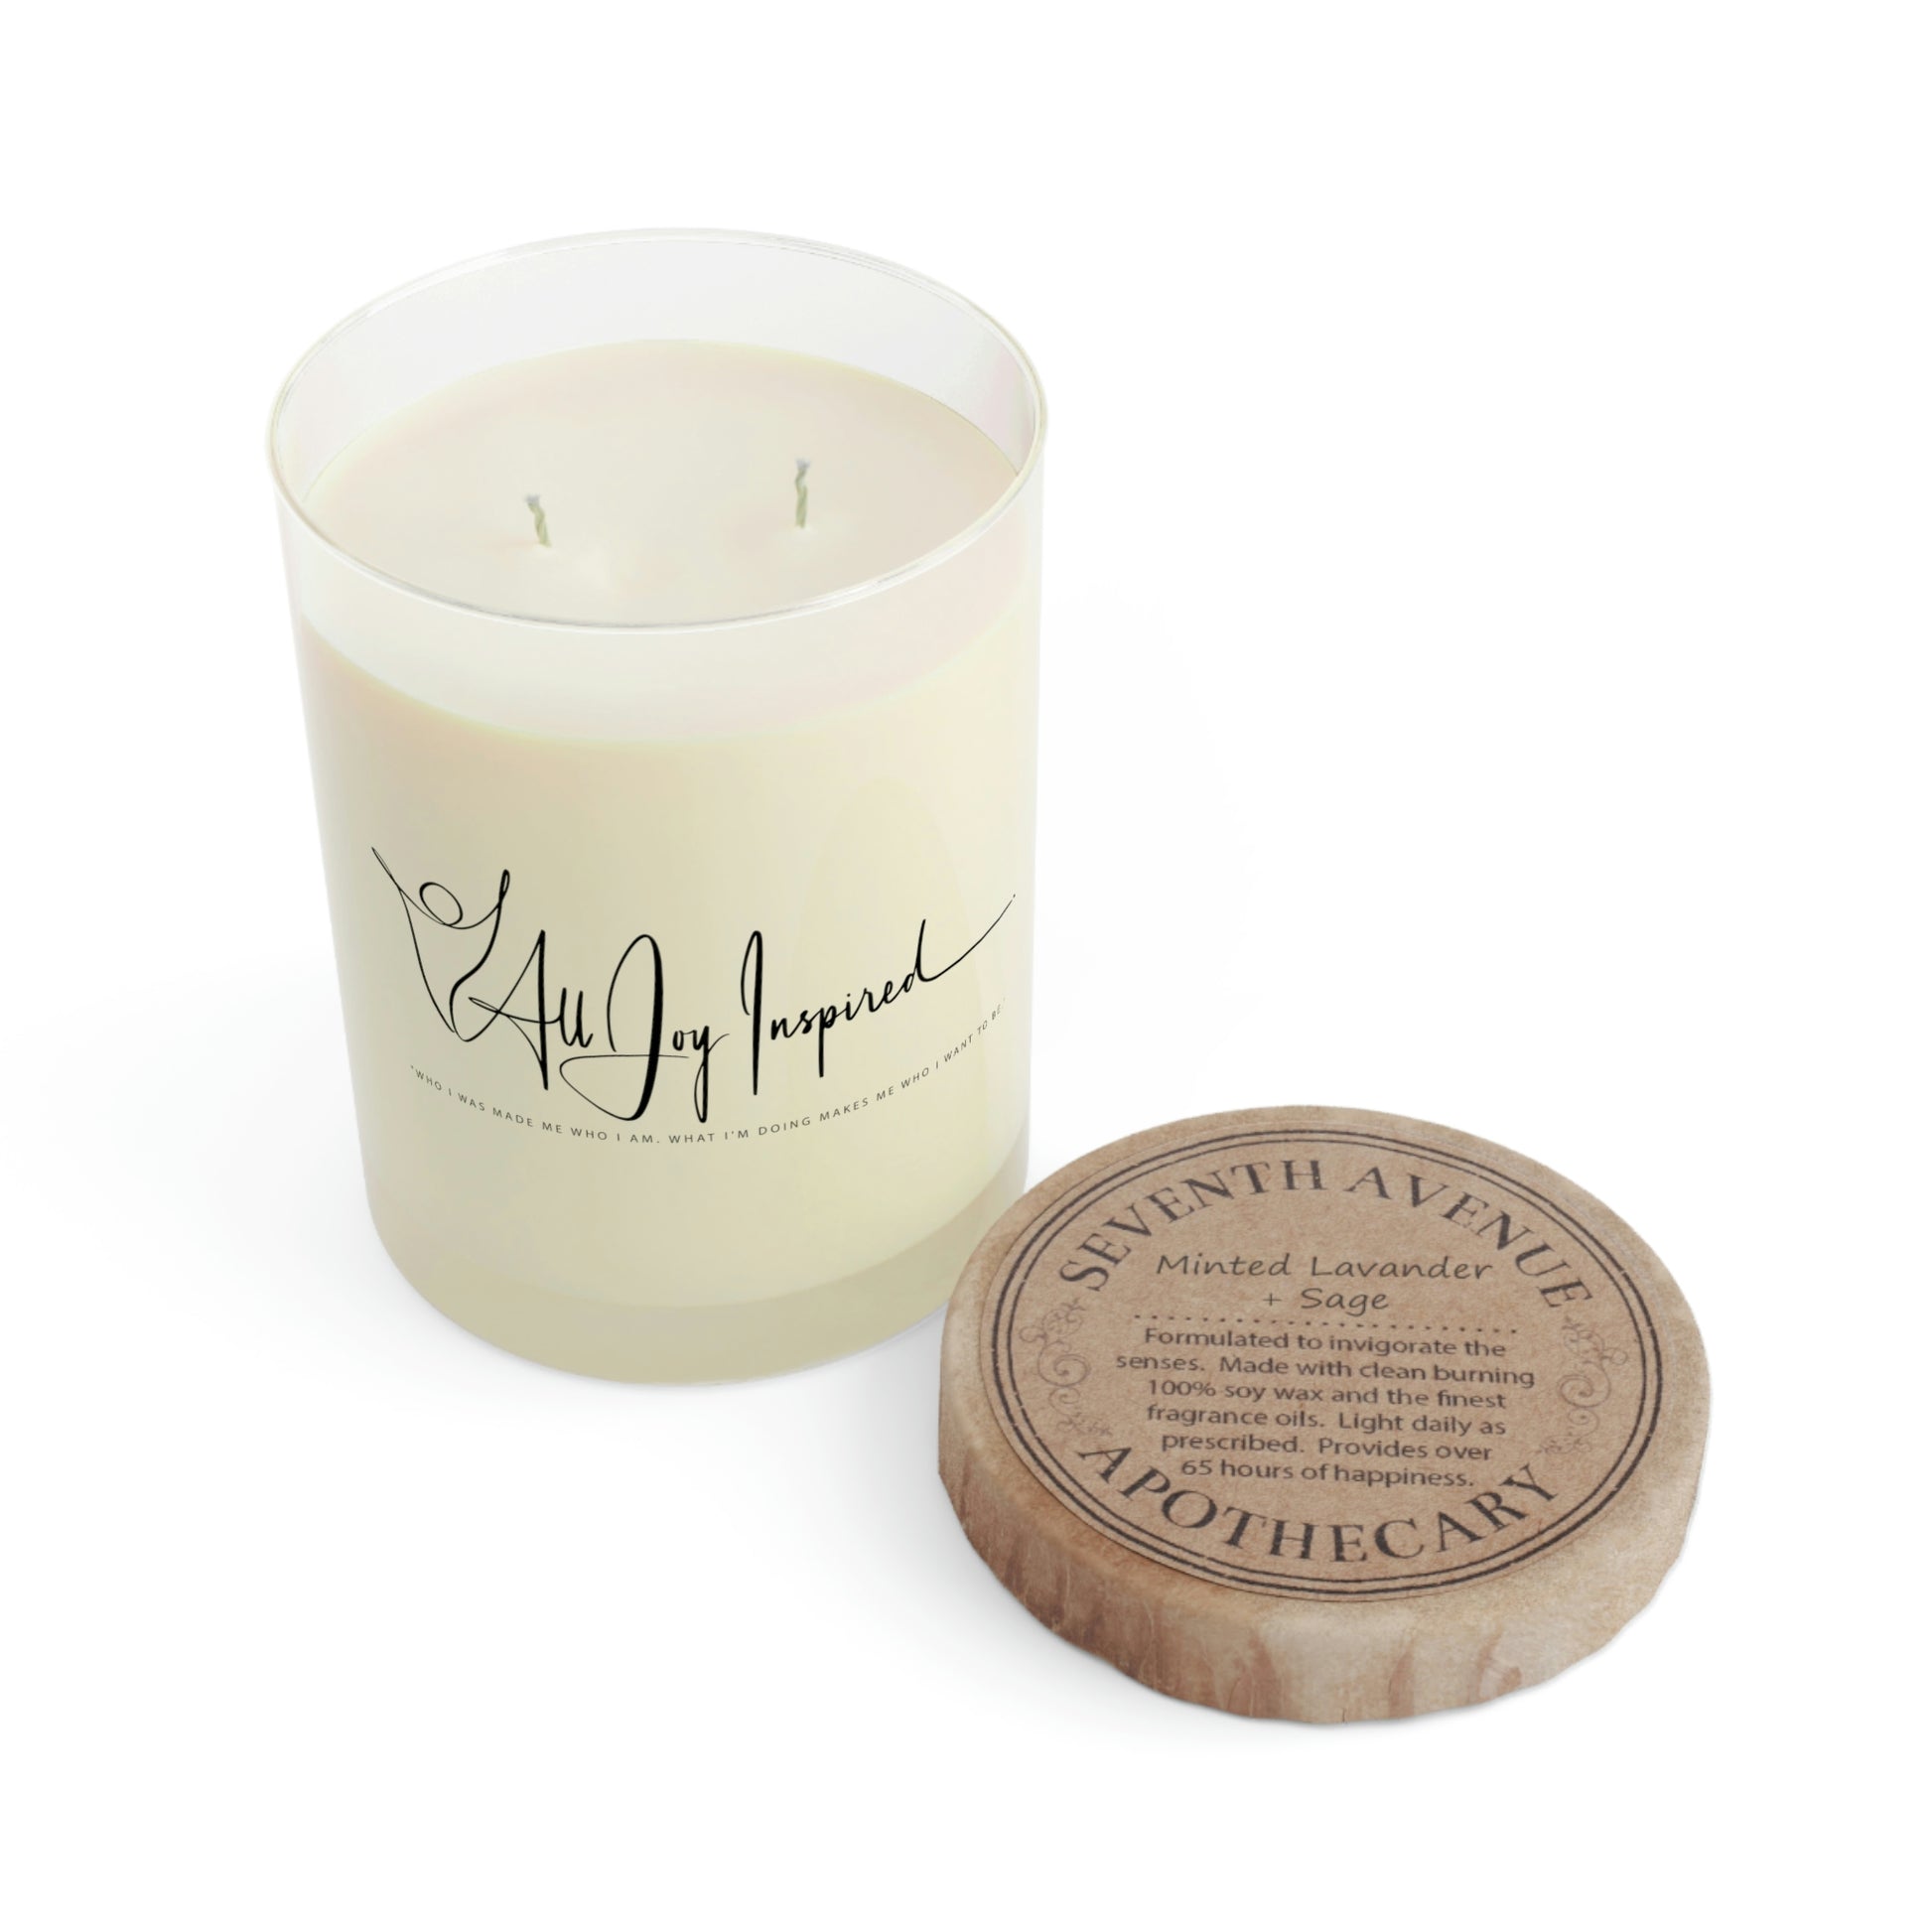 All JOY Inspired scented candle 11 oz